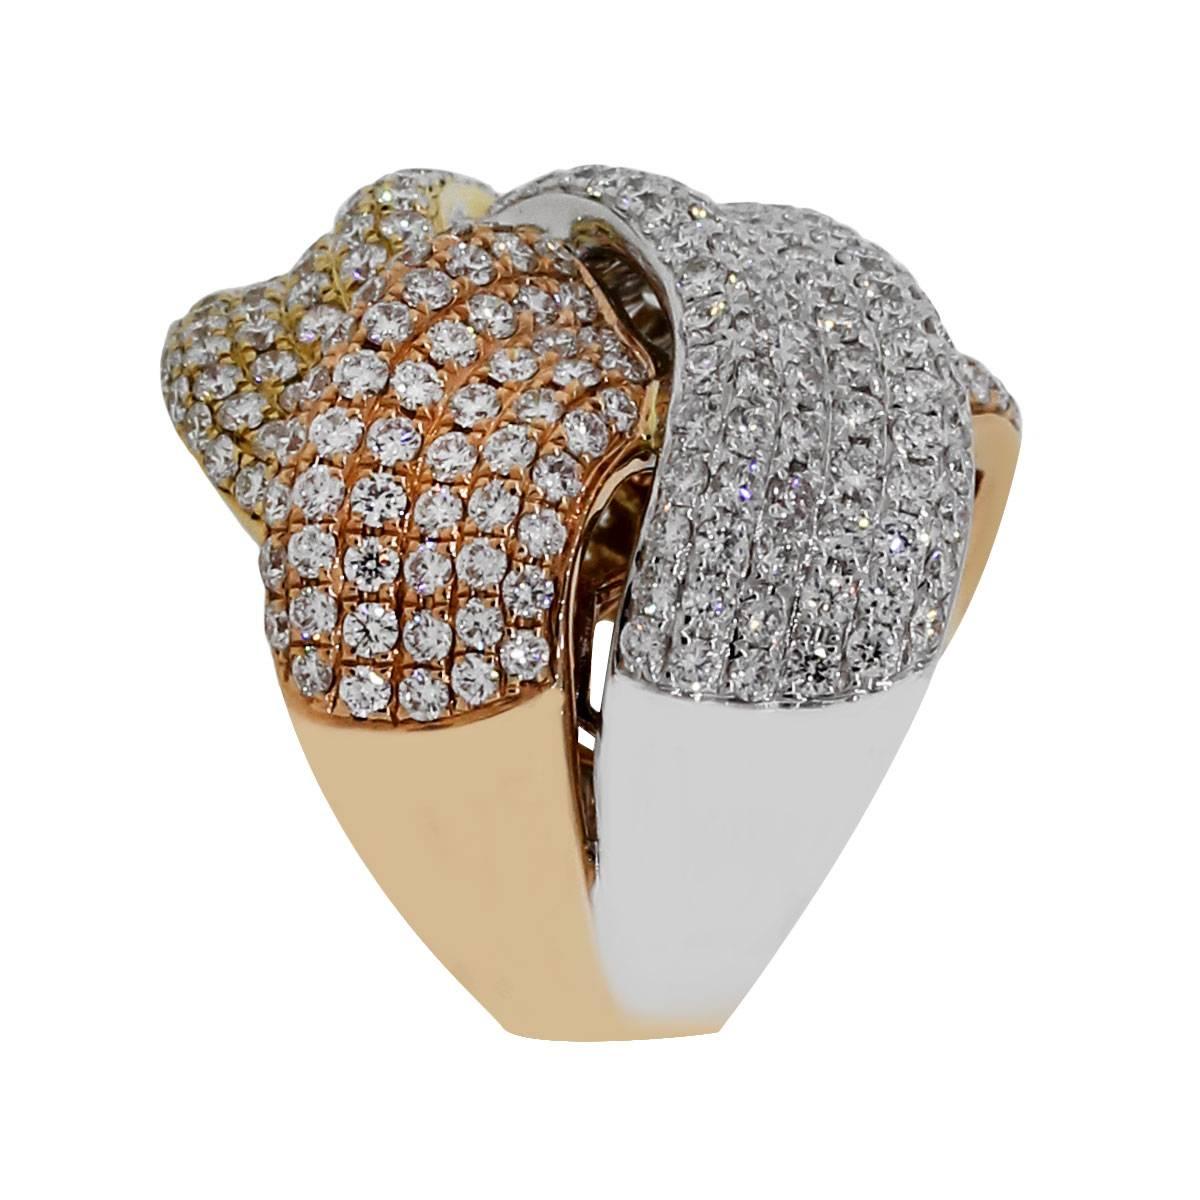 Material: 18k white gold, 18k yellow gold and 18k rose gold
Diamond Details: Approximately 6.38ctw round brilliant diamonds. Diamonds are G/H in color and VS in clarity.
Ring Size: 6.5
Ring Measurements: 1″ x 0.95″ x 1″
Total Weight: 25.6g